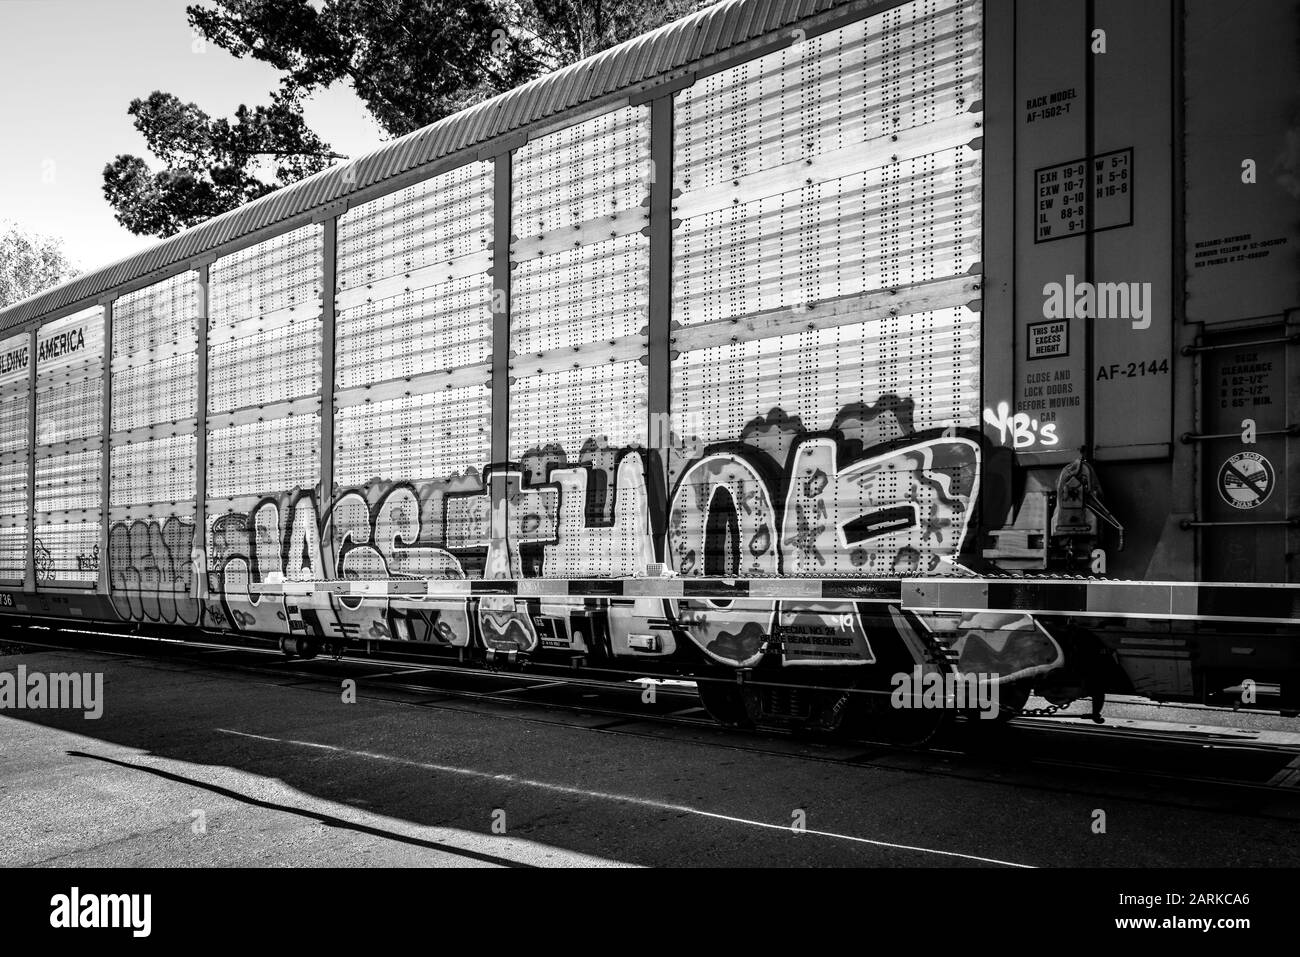 Close up of graffiti on train car transporting new vehicles from Mexico into Nogales, AZ, USA, in black and white Stock Photo